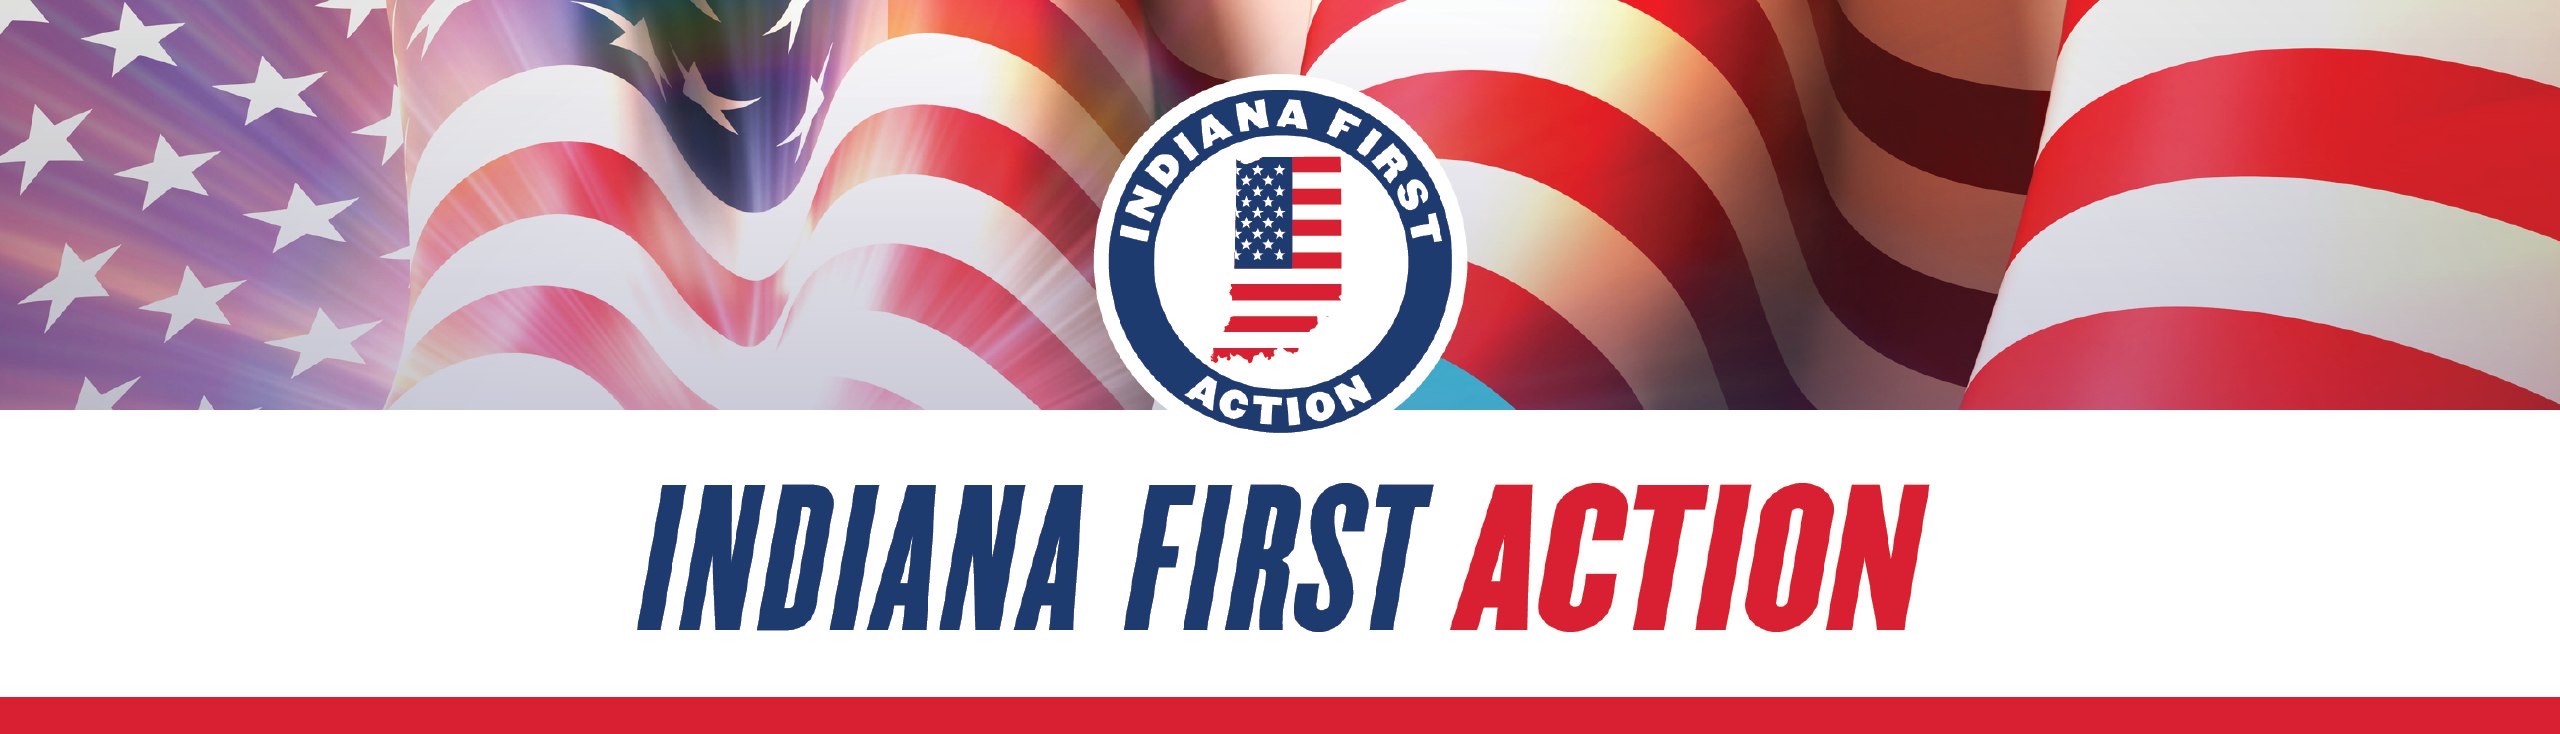 IFA's Model for Paper Ballots Hand Counted - Indiana First Action